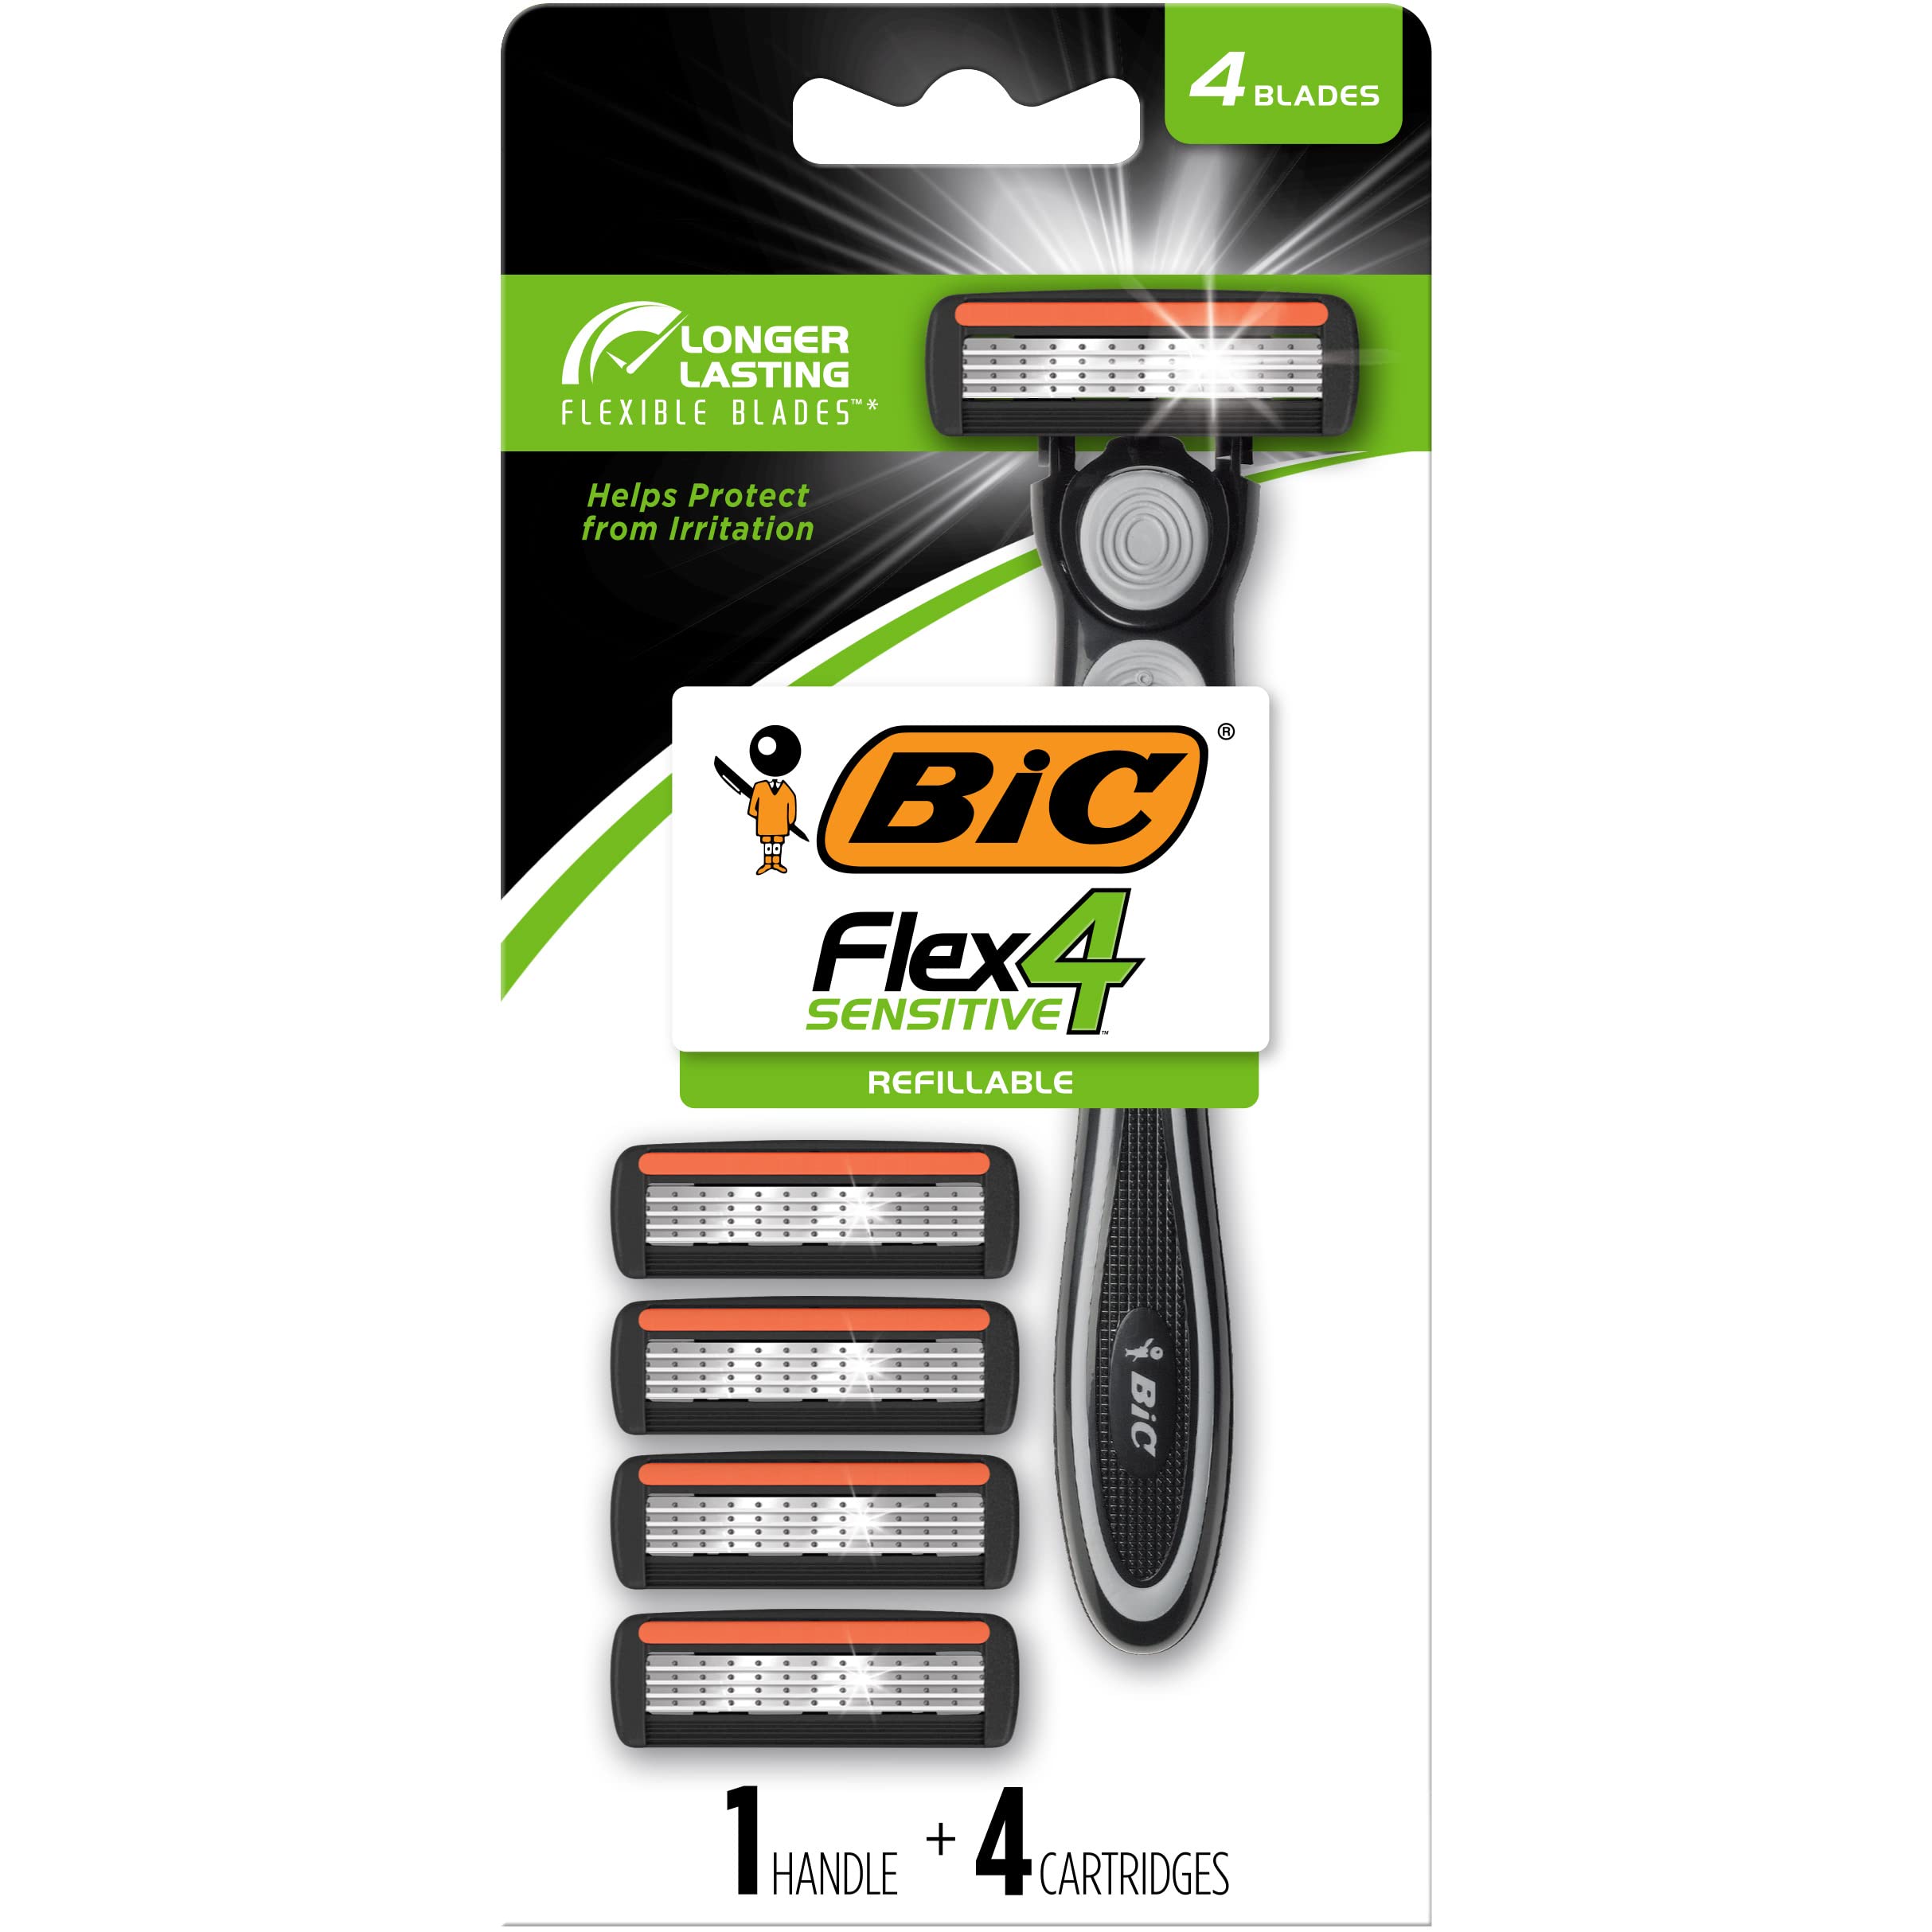 BIC Flex 4 Refillable Men's Disposable Razors, For a Smooth, Ultra-Close and Comfortable Shave, 1 Handle and 4 Cartridges, 5 Piece Razor Set